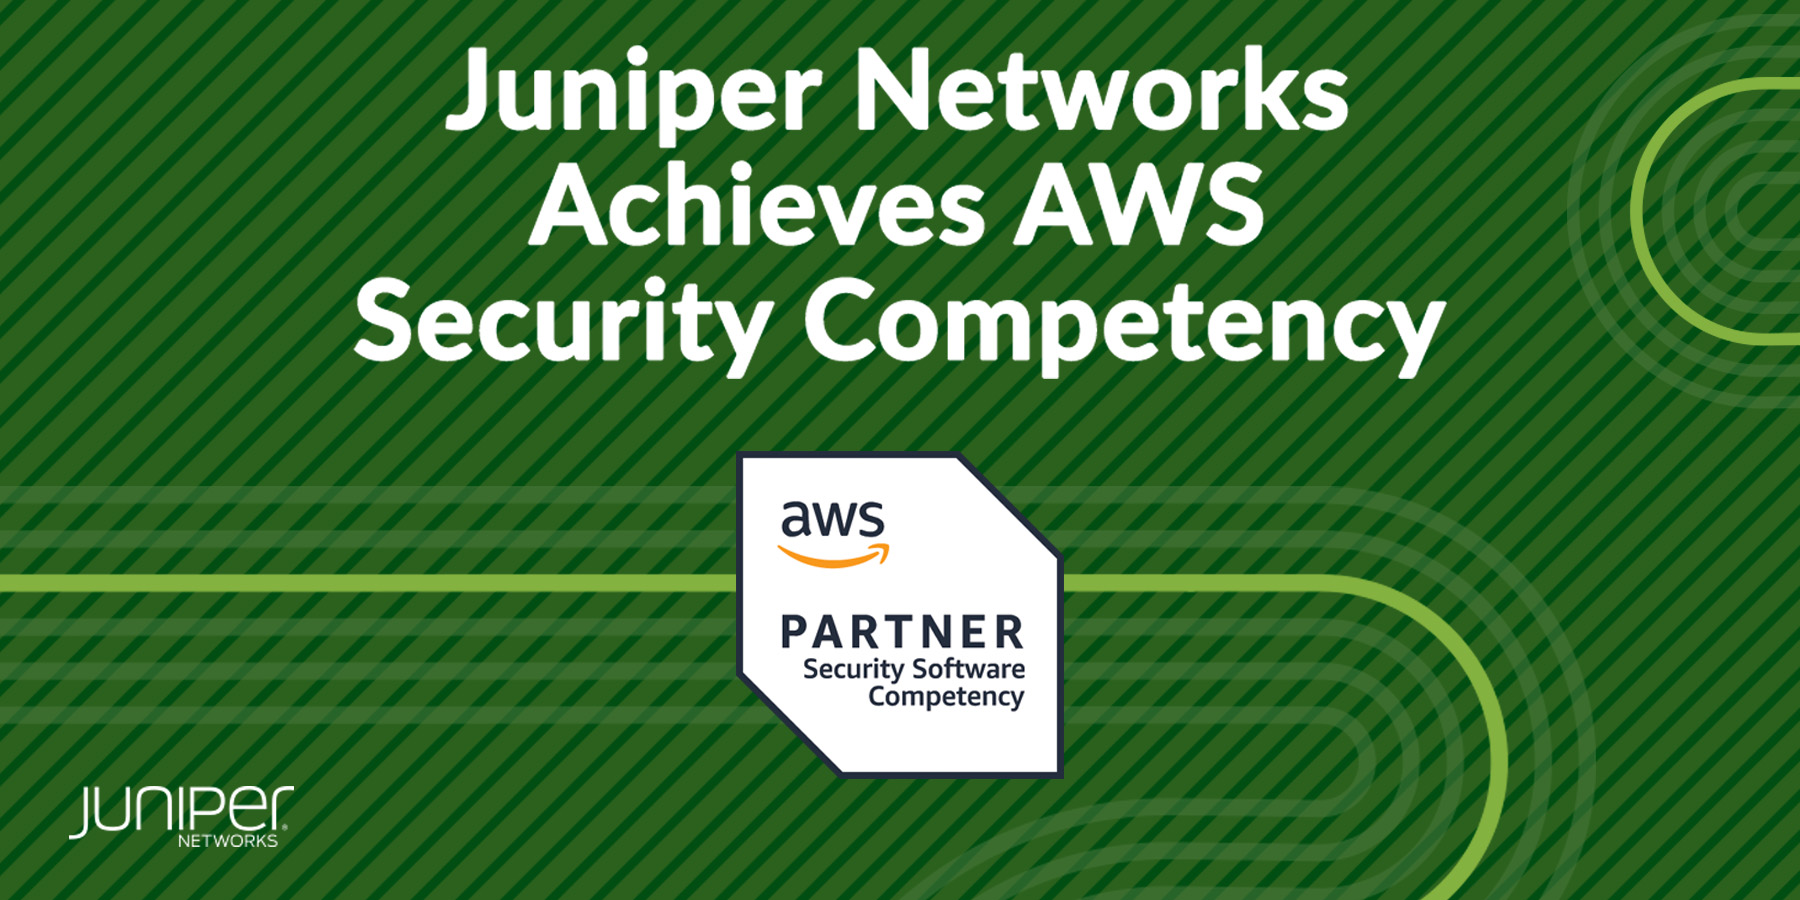 Juniper Networks Achieves AWS Security Competency